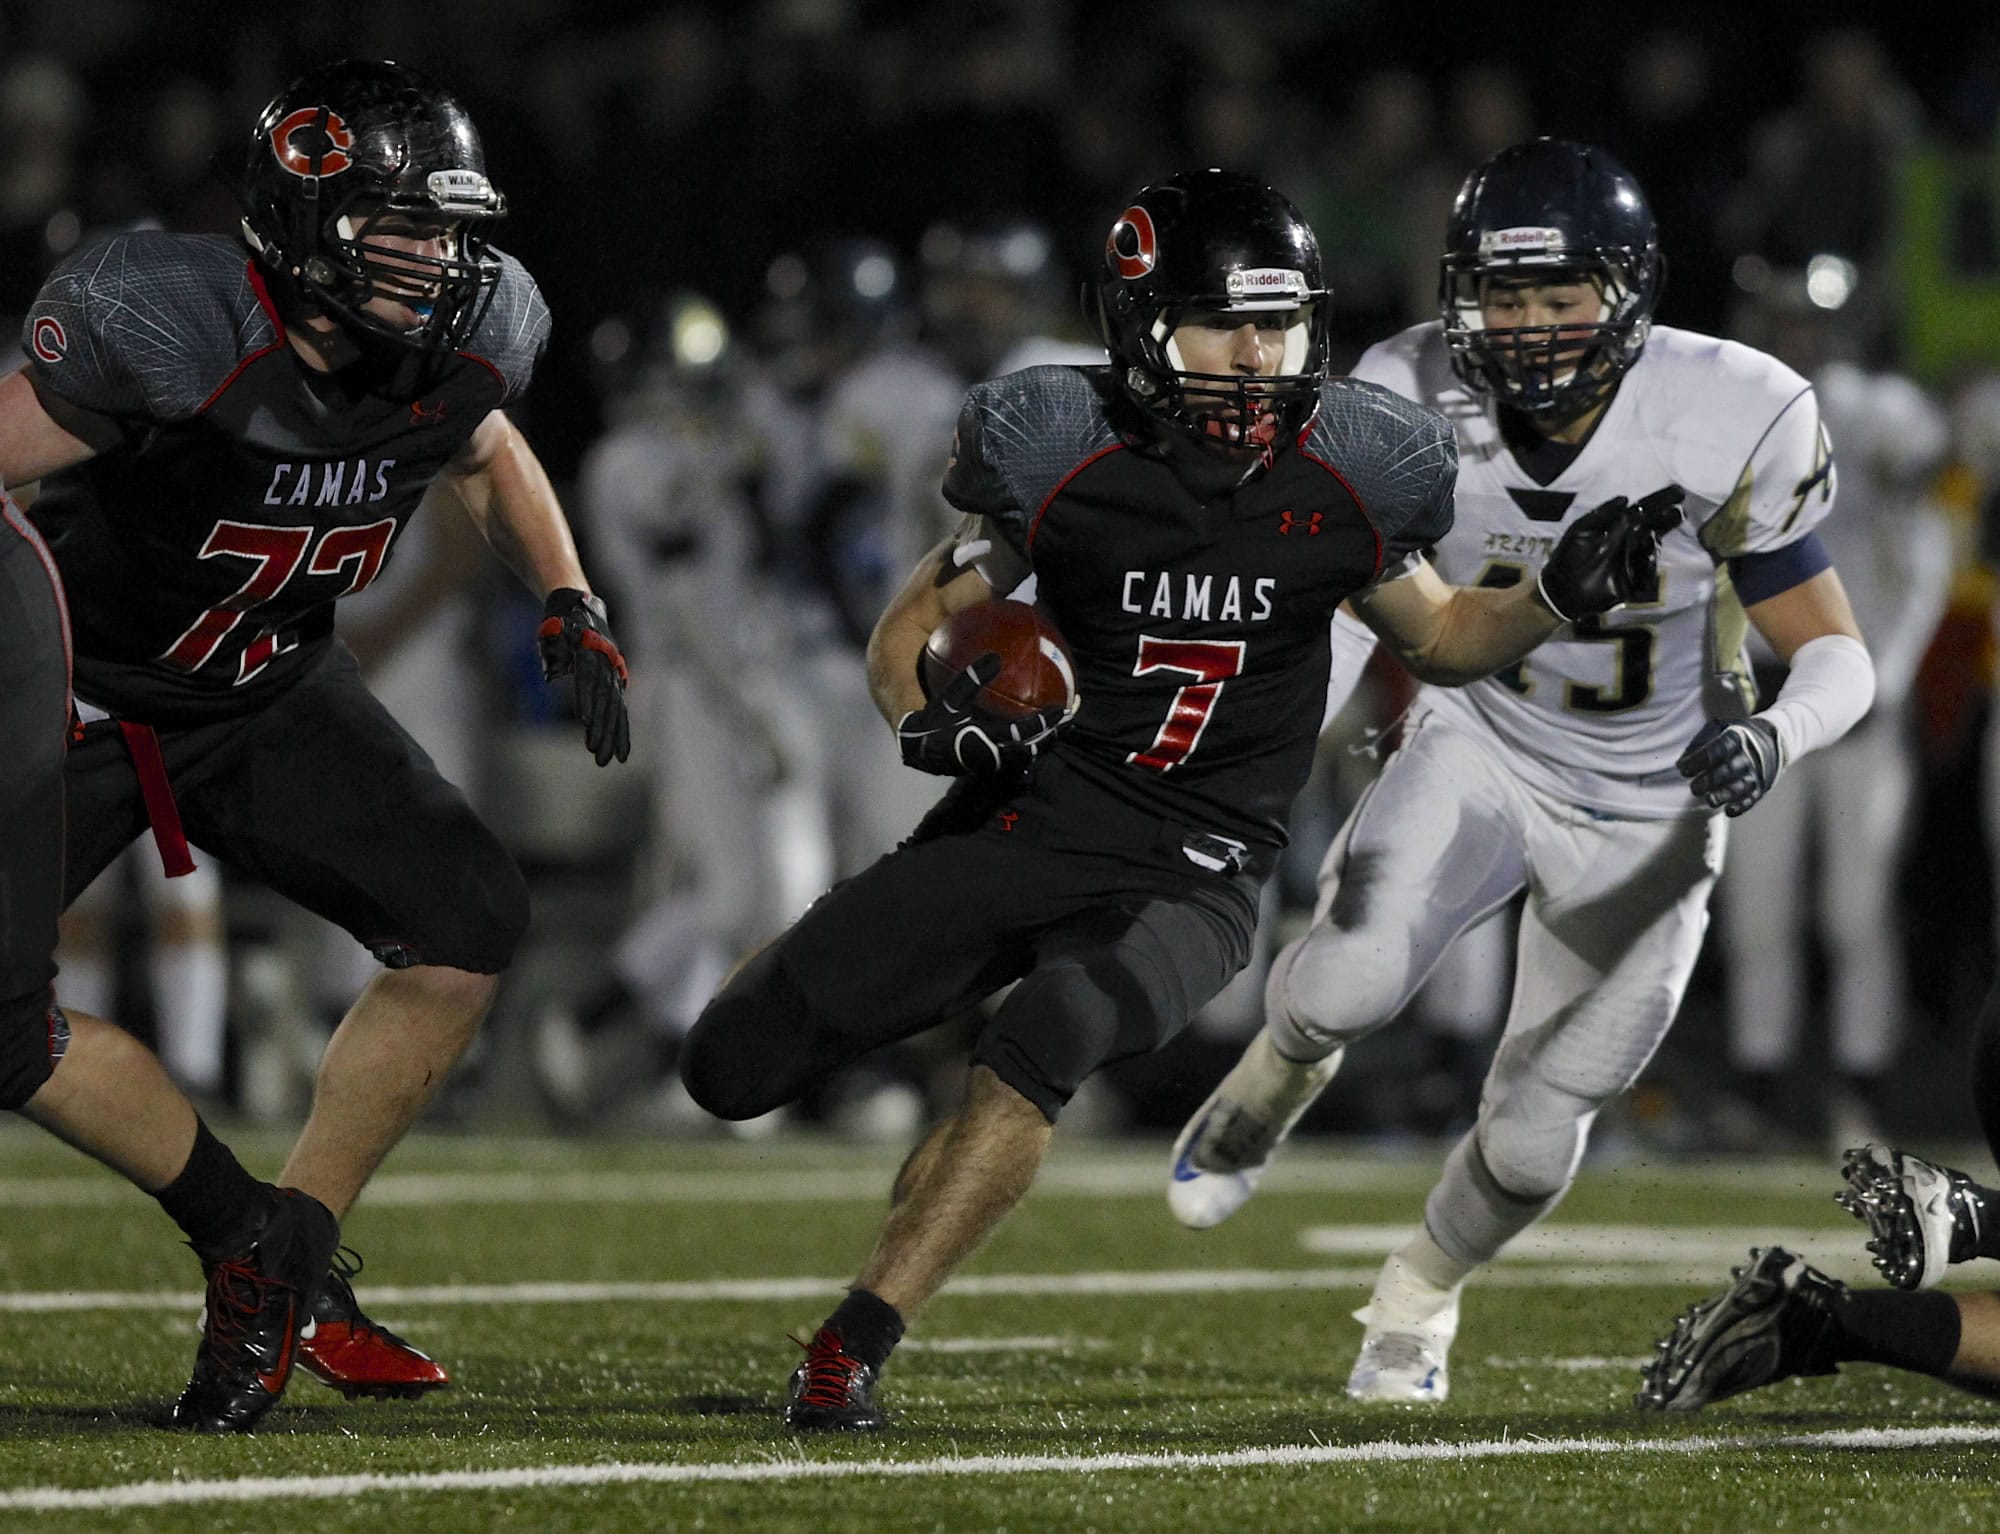 Camas running back Nate Beasley (7) carries ball against Arlington during Saturday's 4A state football playoff game.